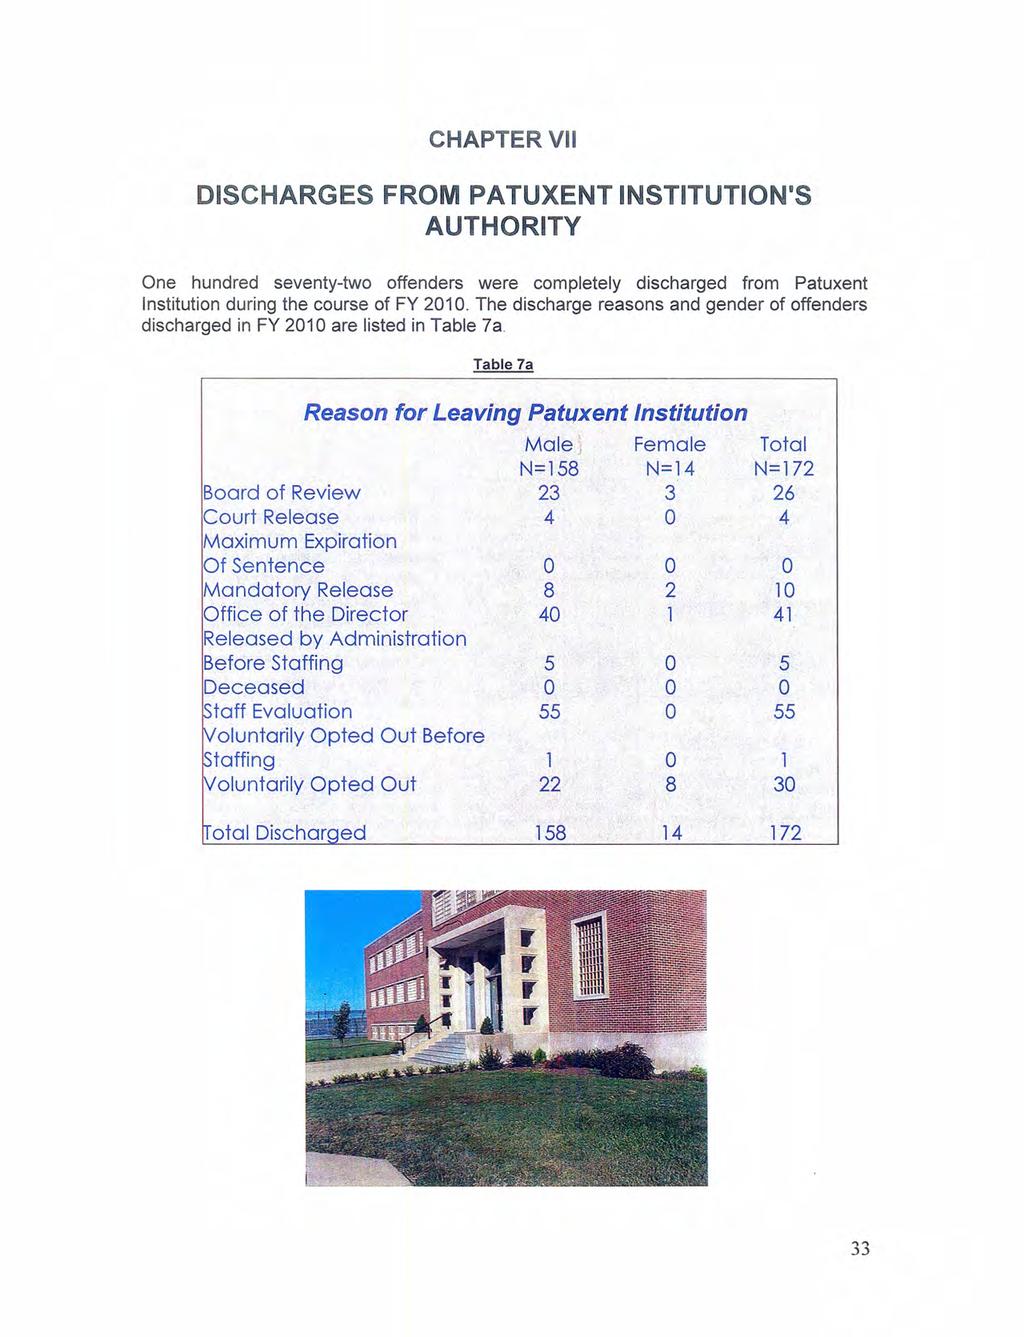 CHAPTER VII DISCHARGES FROM PATUXENT INSTITUTION'S AUTHORITY One hundred seventy-two offenders were completely discharged from Patuxent Institution during the course of FY 2010.